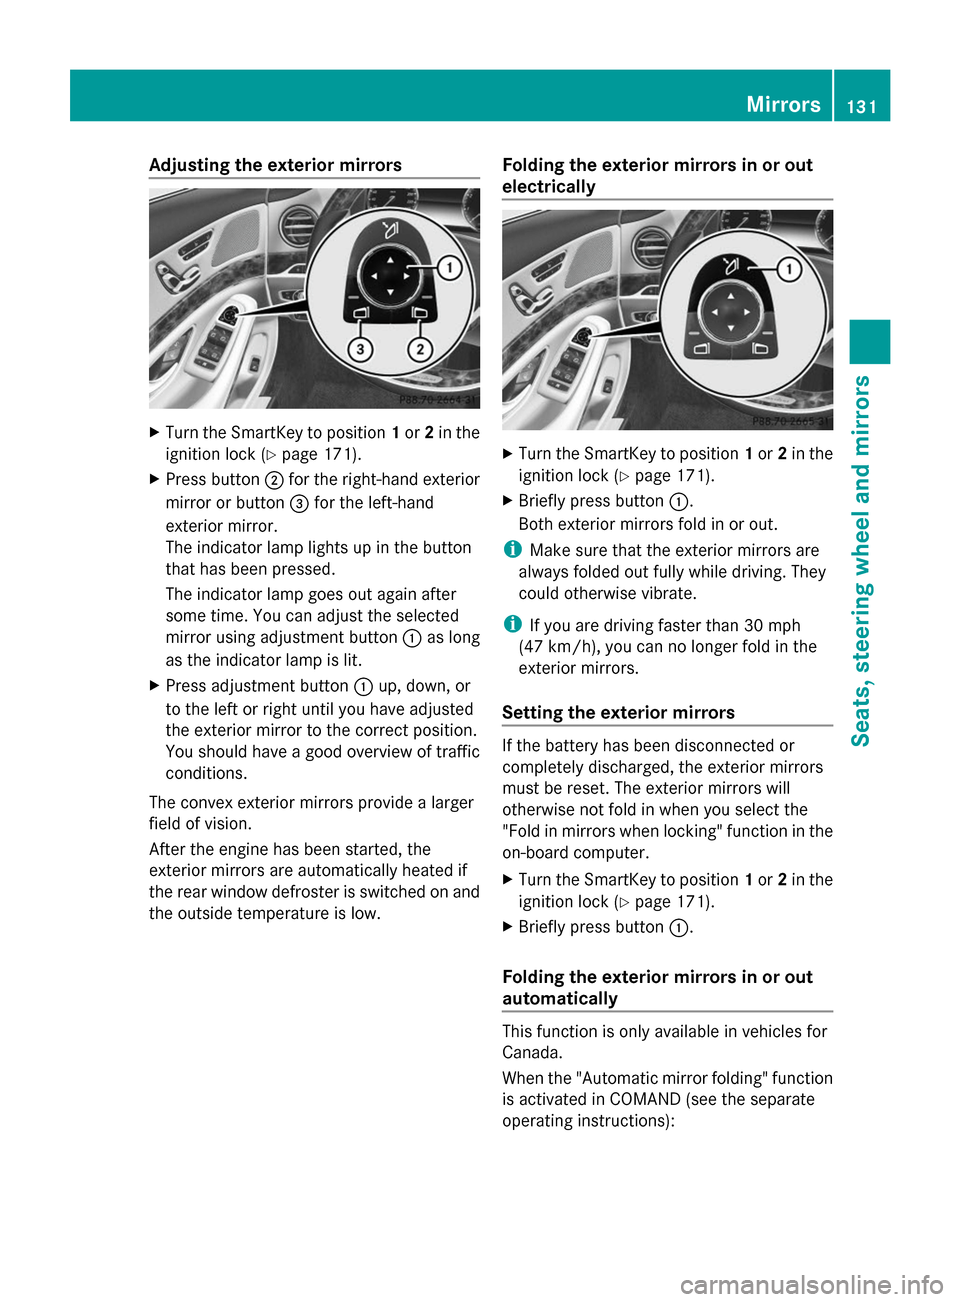 MERCEDES-BENZ S-Class 2014 W222 Workshop Manual Adjusting the exterior mirrors
X
Turn the SmartKey to position 1or 2in the
ignition lock (Y page 171).
X Press button 0044for the right-hand exterior
mirror or button 0087for the left-hand
exterior mi